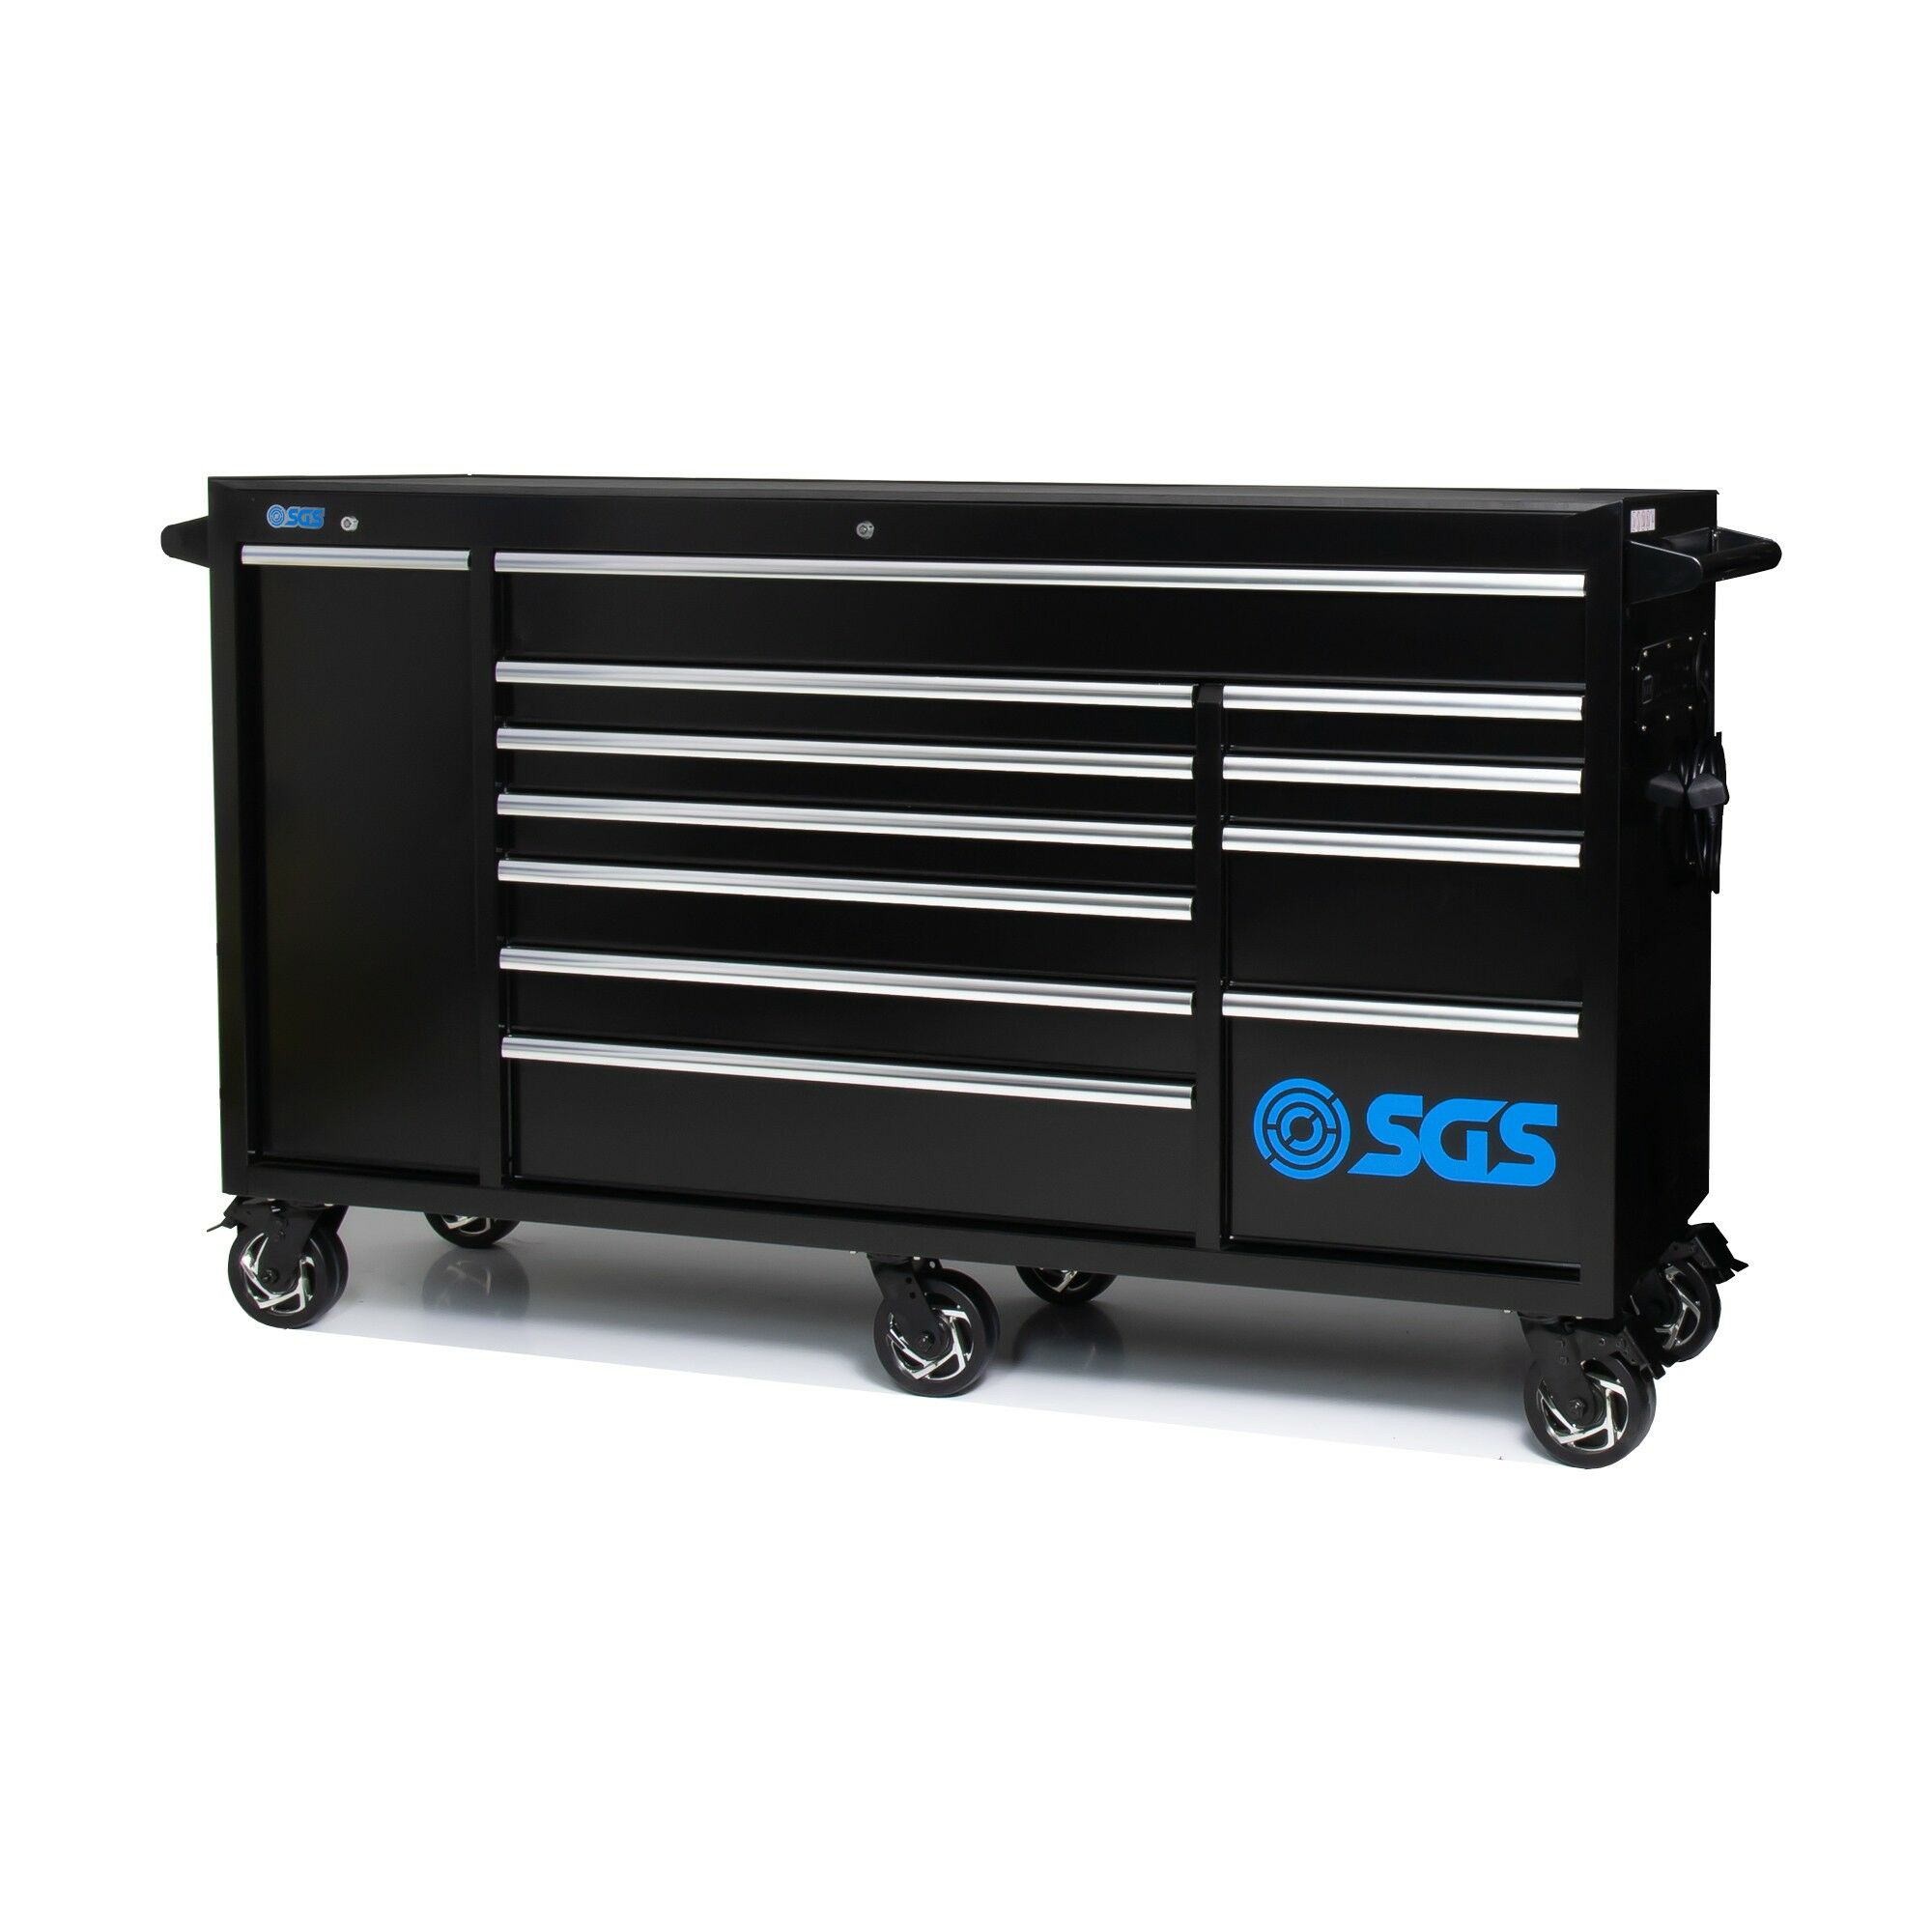 SGS 72in 12 Drawer Professional Tool Cabinet with Caster Wheels